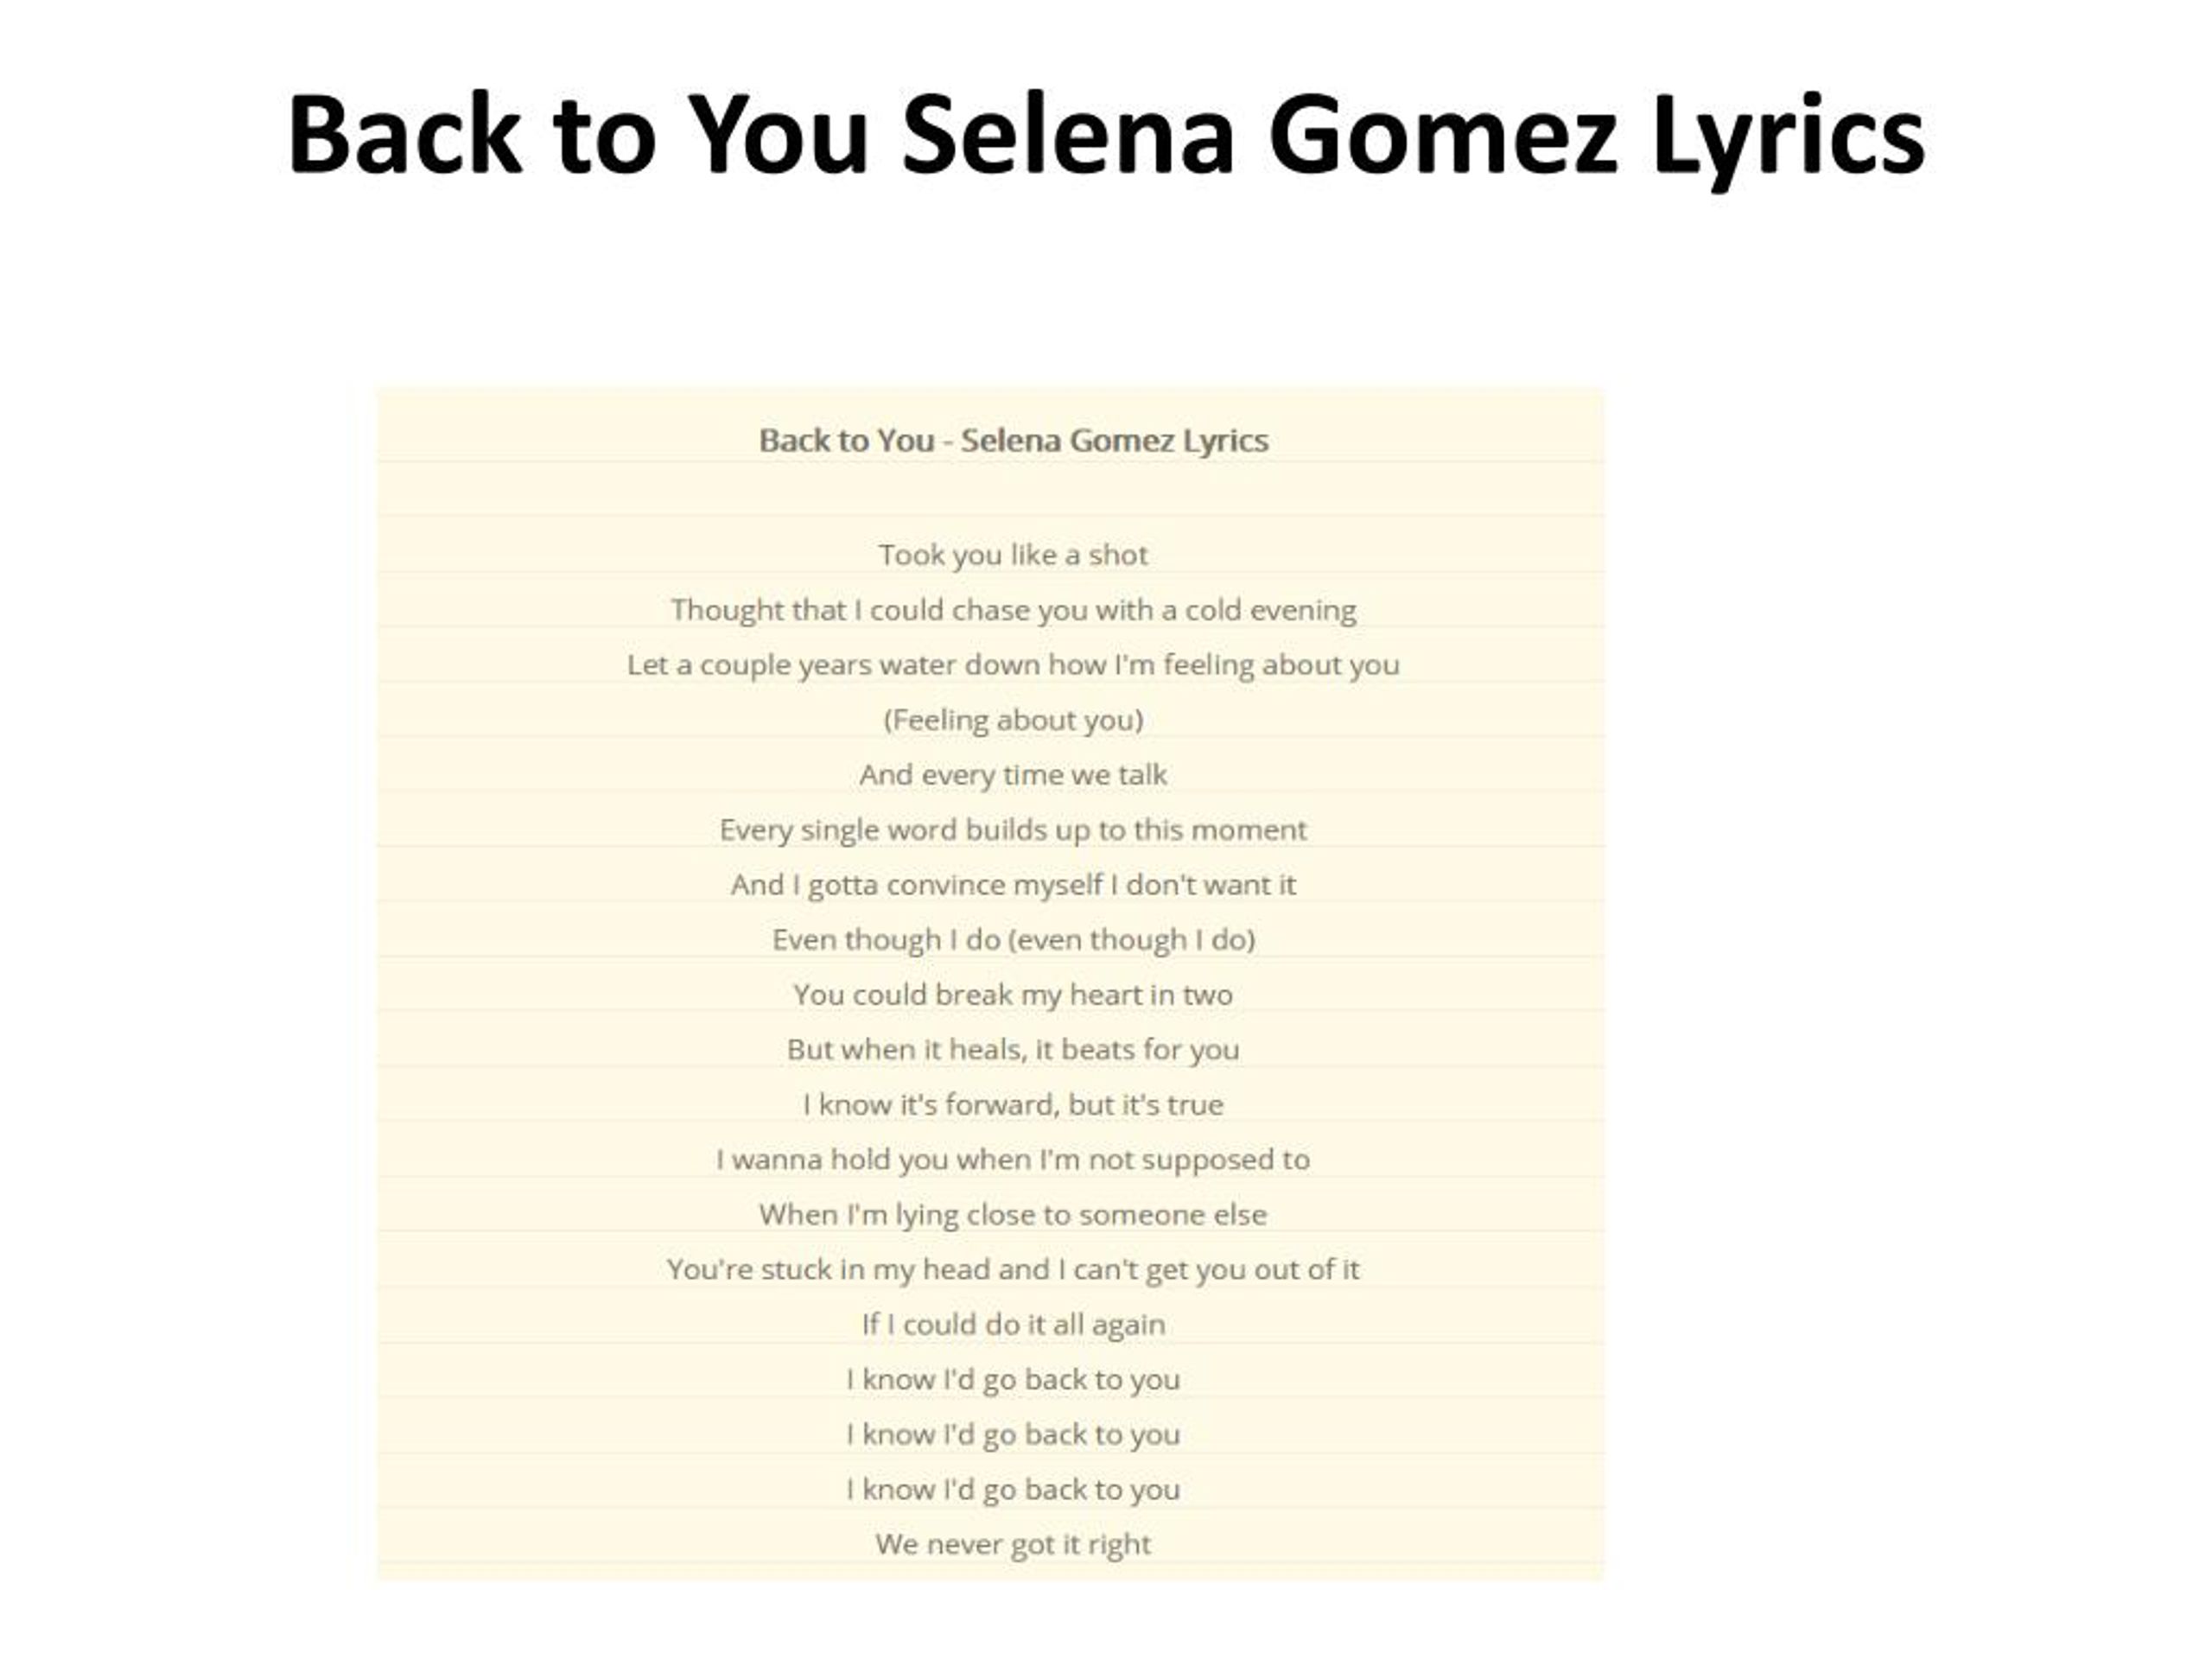 Back to me на русском. Back to you selena текст. Селена Гомес back to you. Селена Гомес текст песни. Back to you перевод.